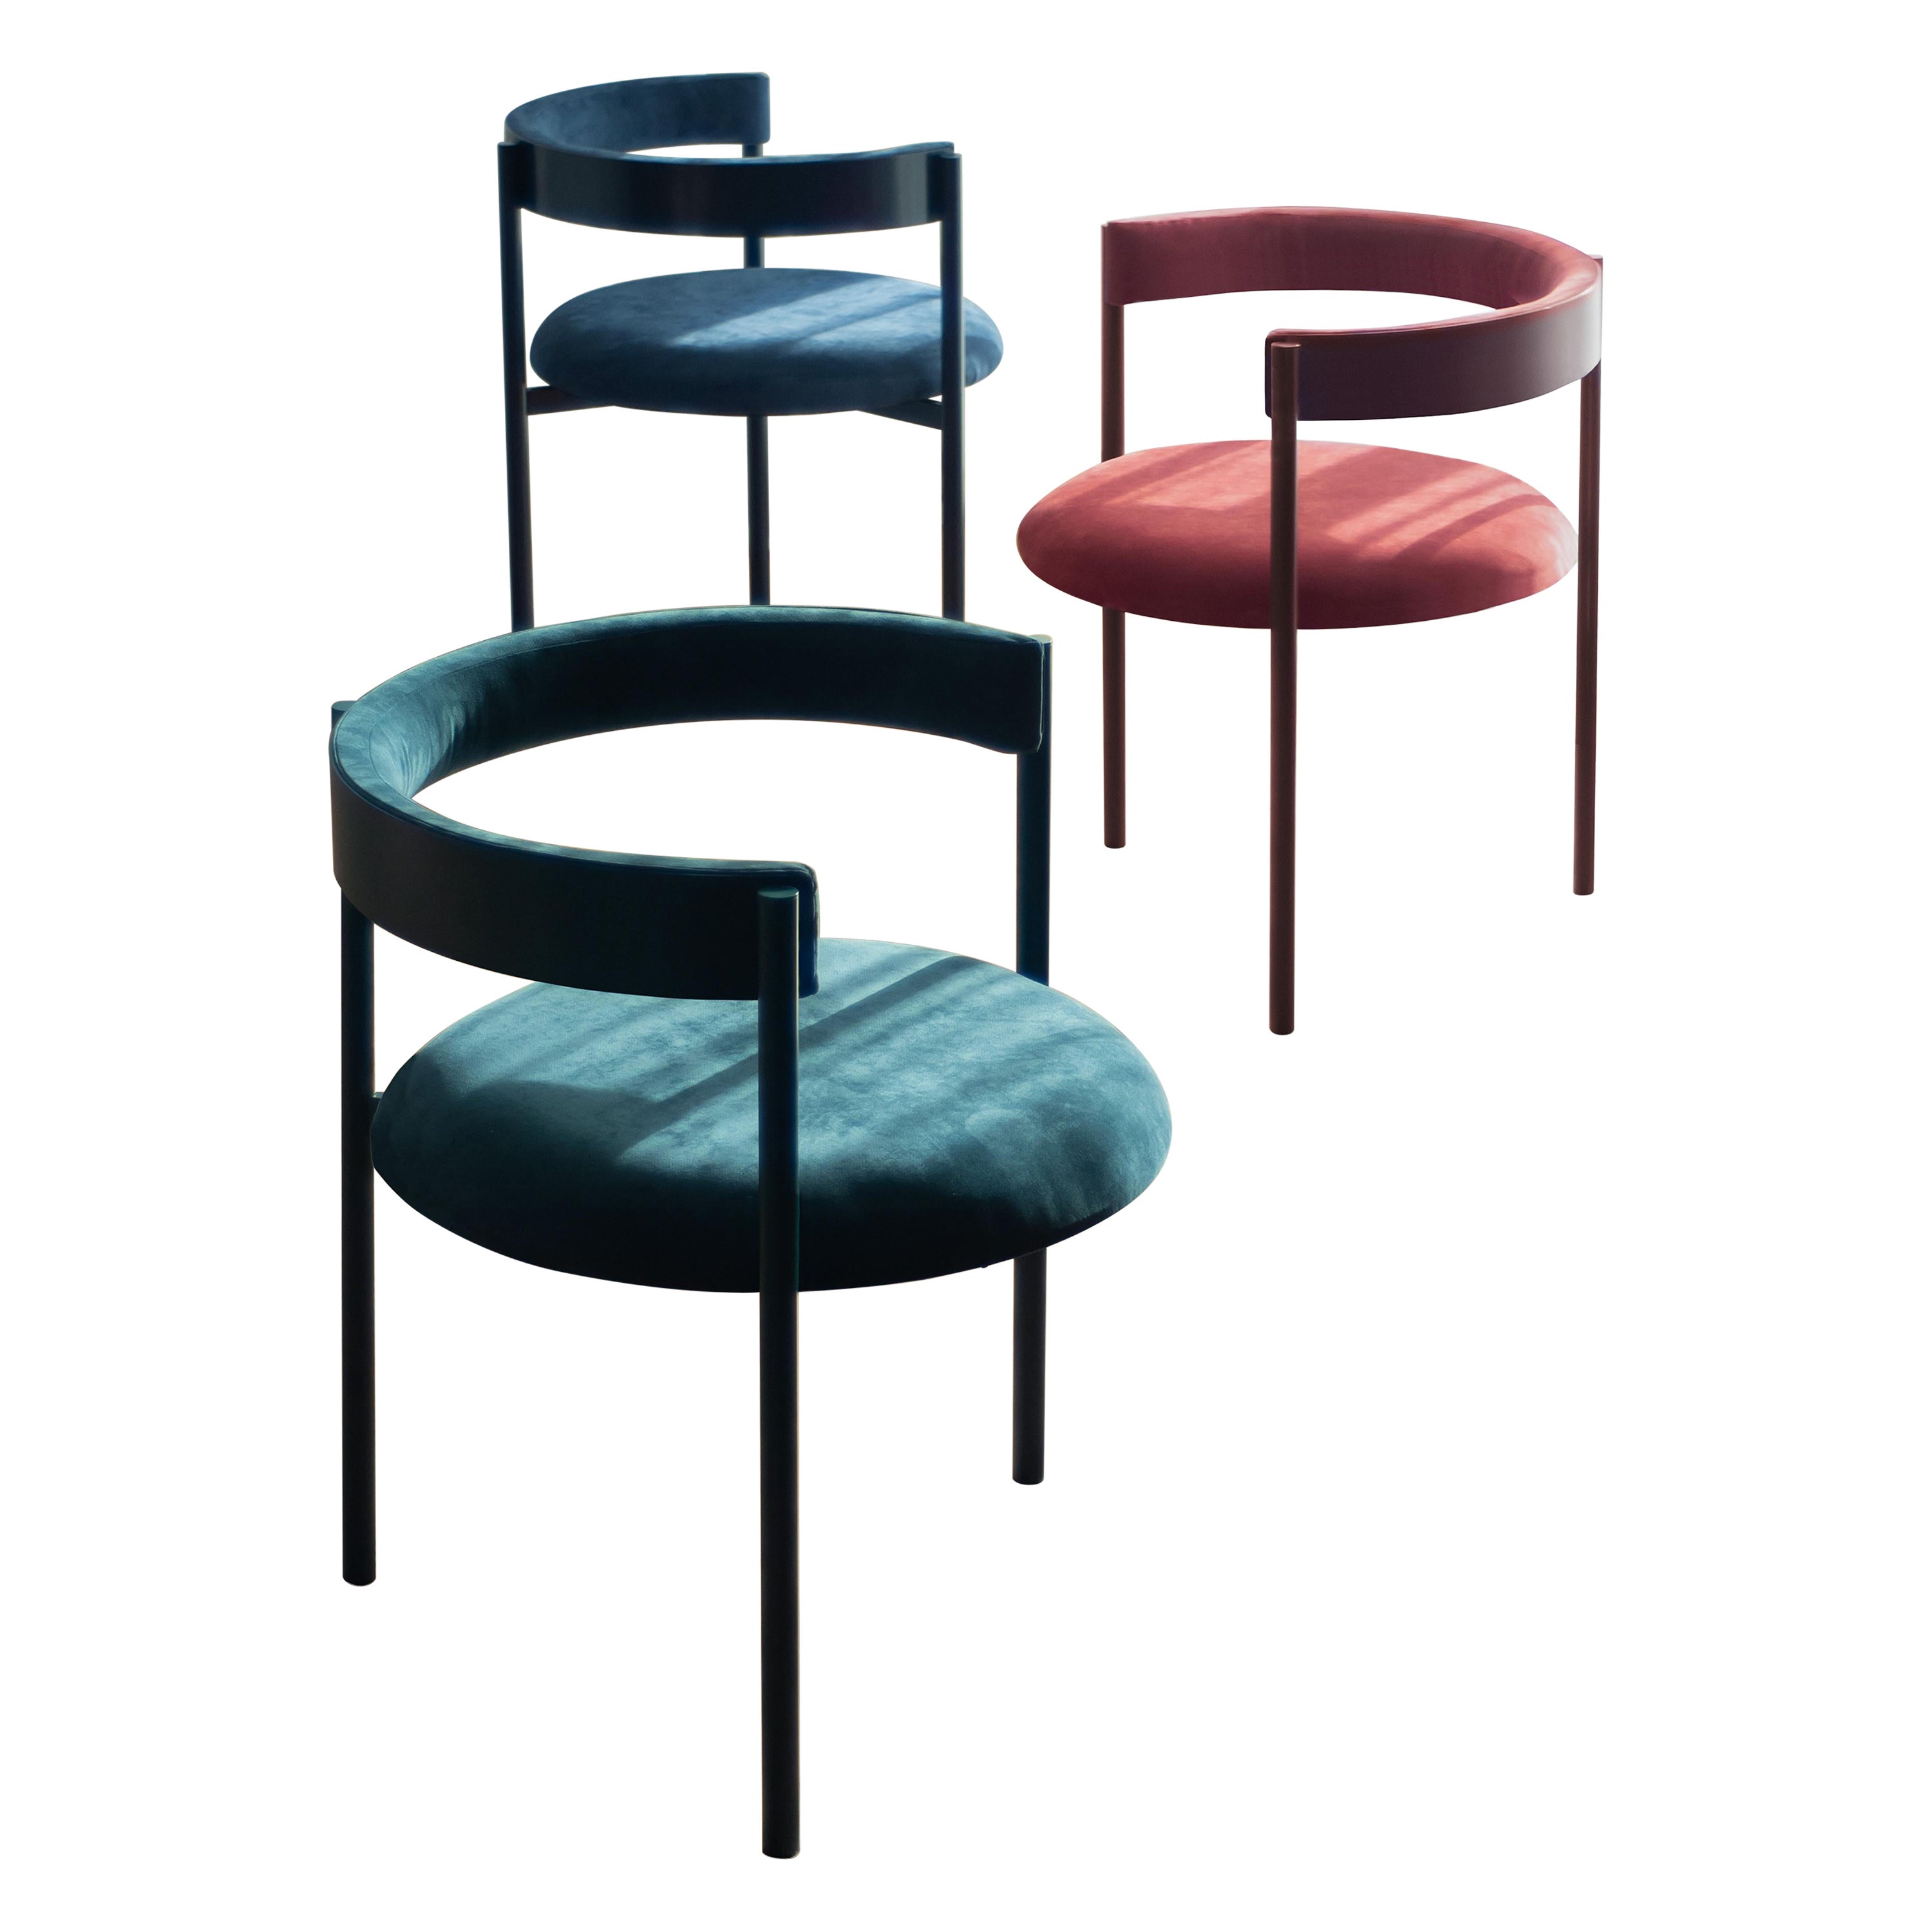 Set of 3 Aro Chairs 'Oceano, Merlot & Dark Blue' by Ries For Sale